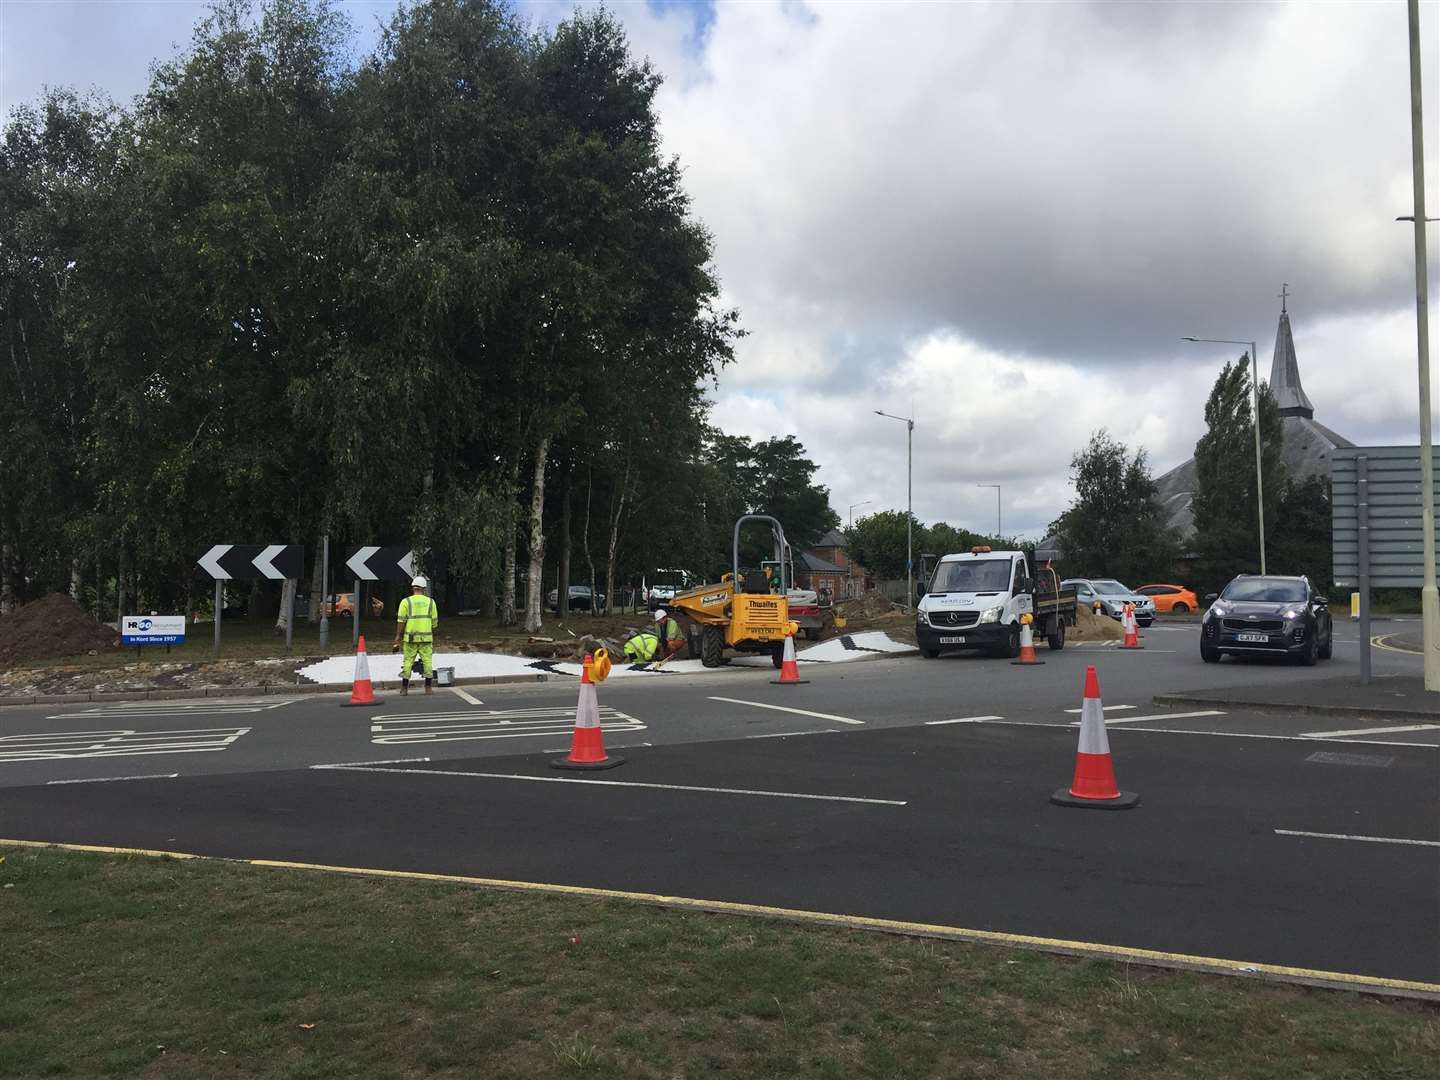 Work is underway on the New Street roundabout